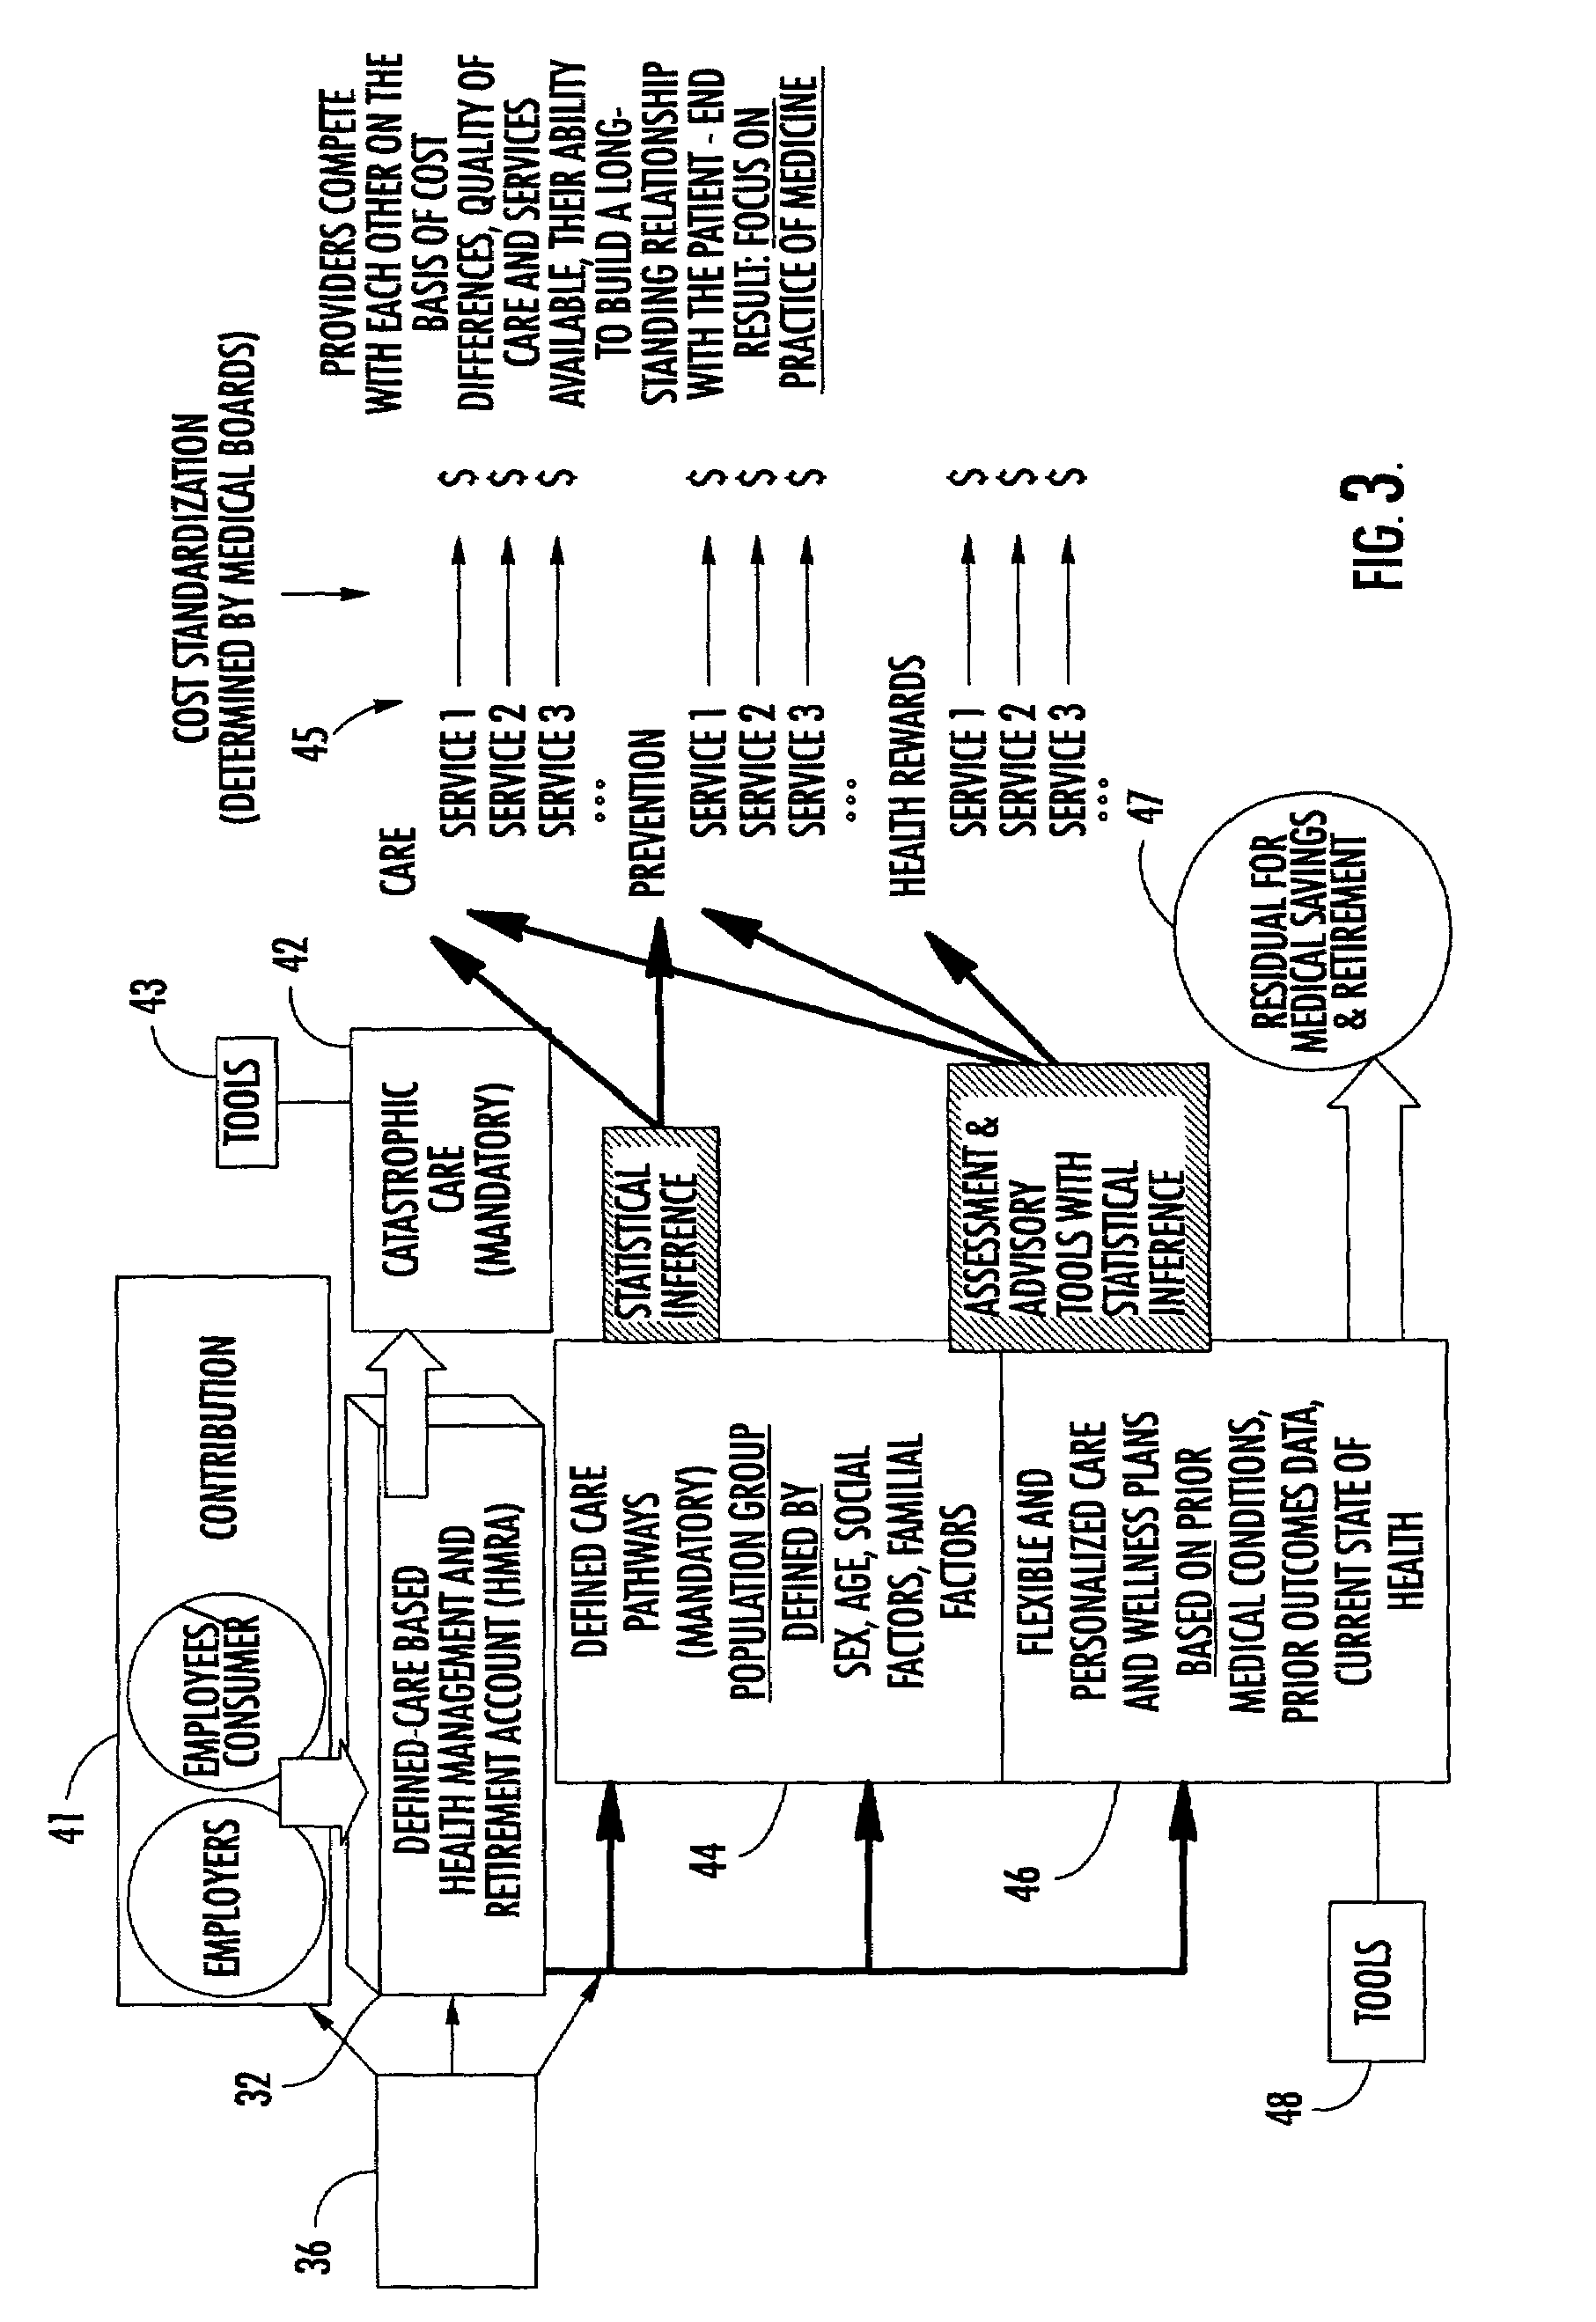 System and method for management of health care services